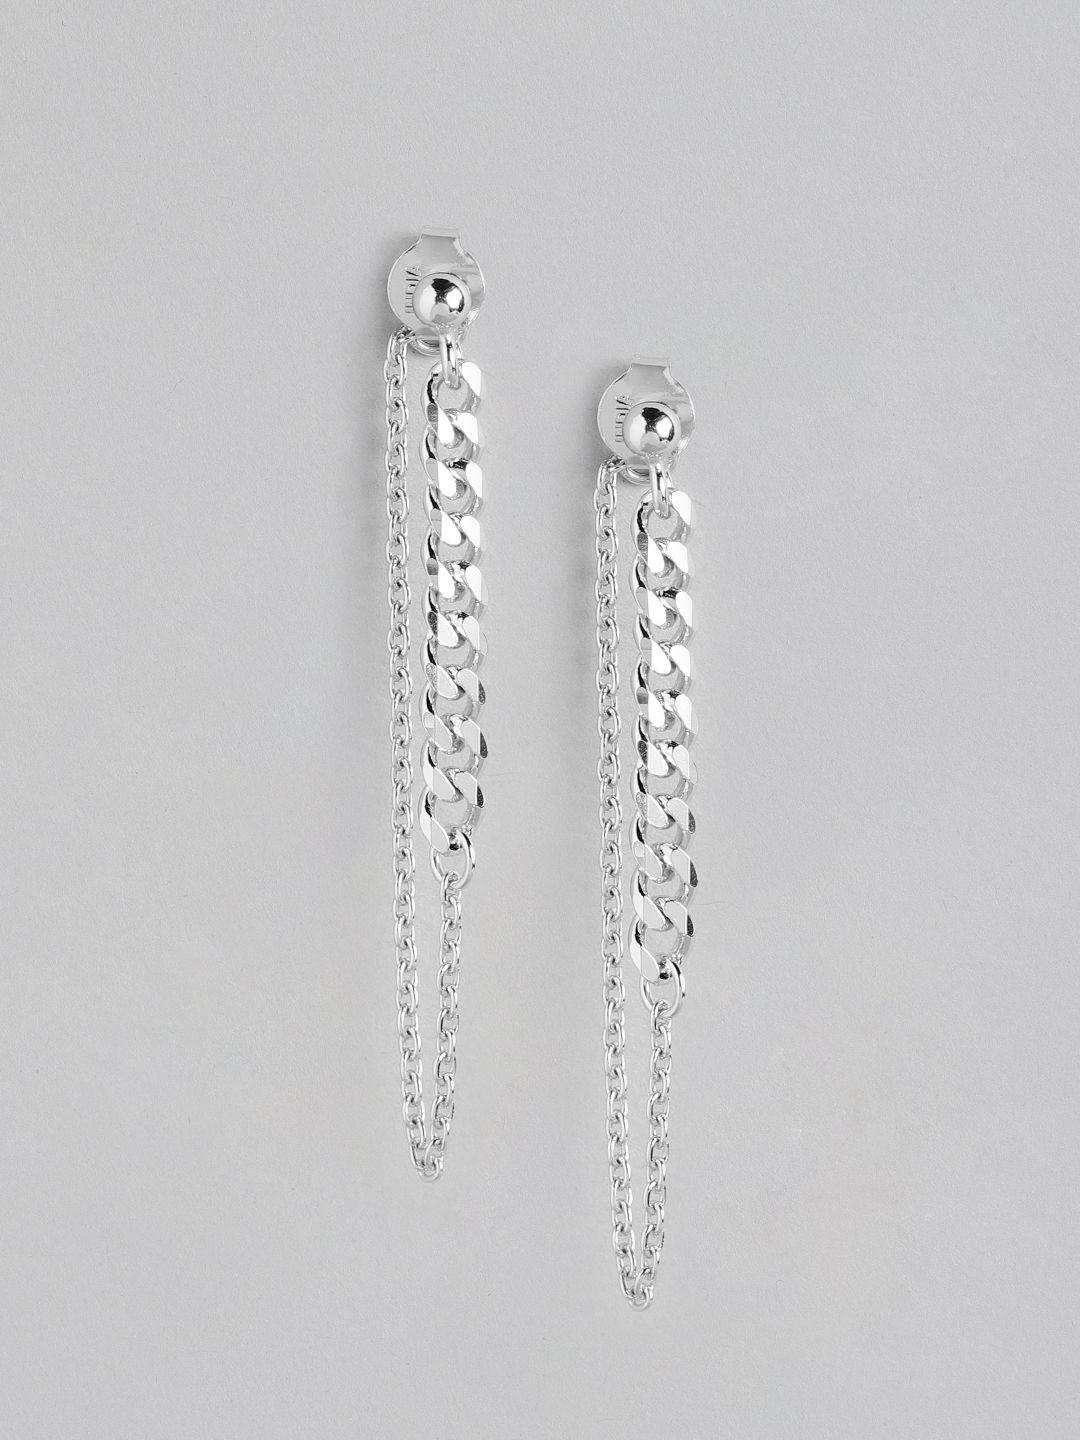 carlton-london-rhodium-plated-925-sterling-silver-contemporary-drop-earrings